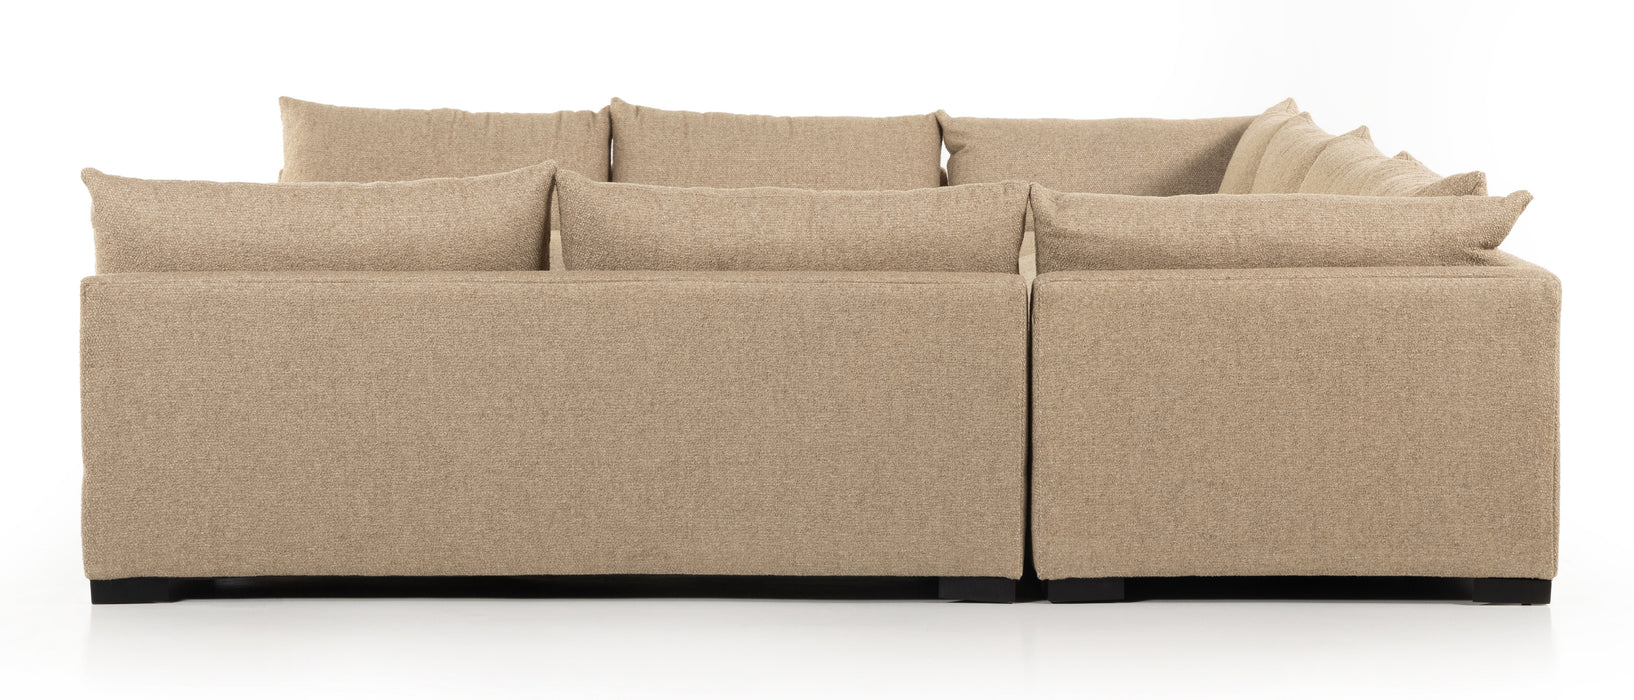 Grant 5 PC Sectional